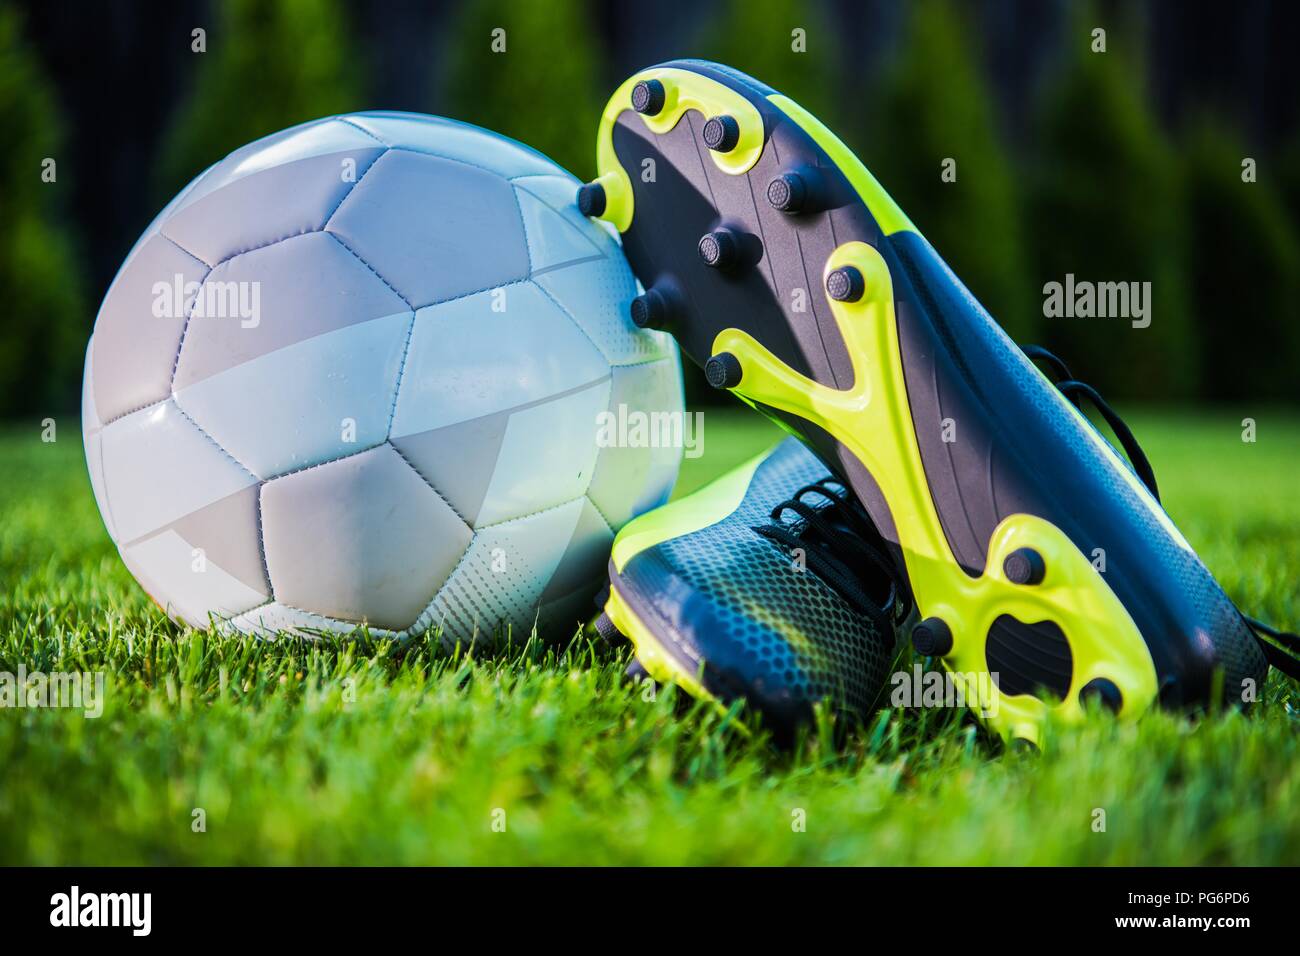 Soccer Tournament Concept with Modern Soccer Ball and Player Cleats Shoes. Team Sports Theme. Stock Photo